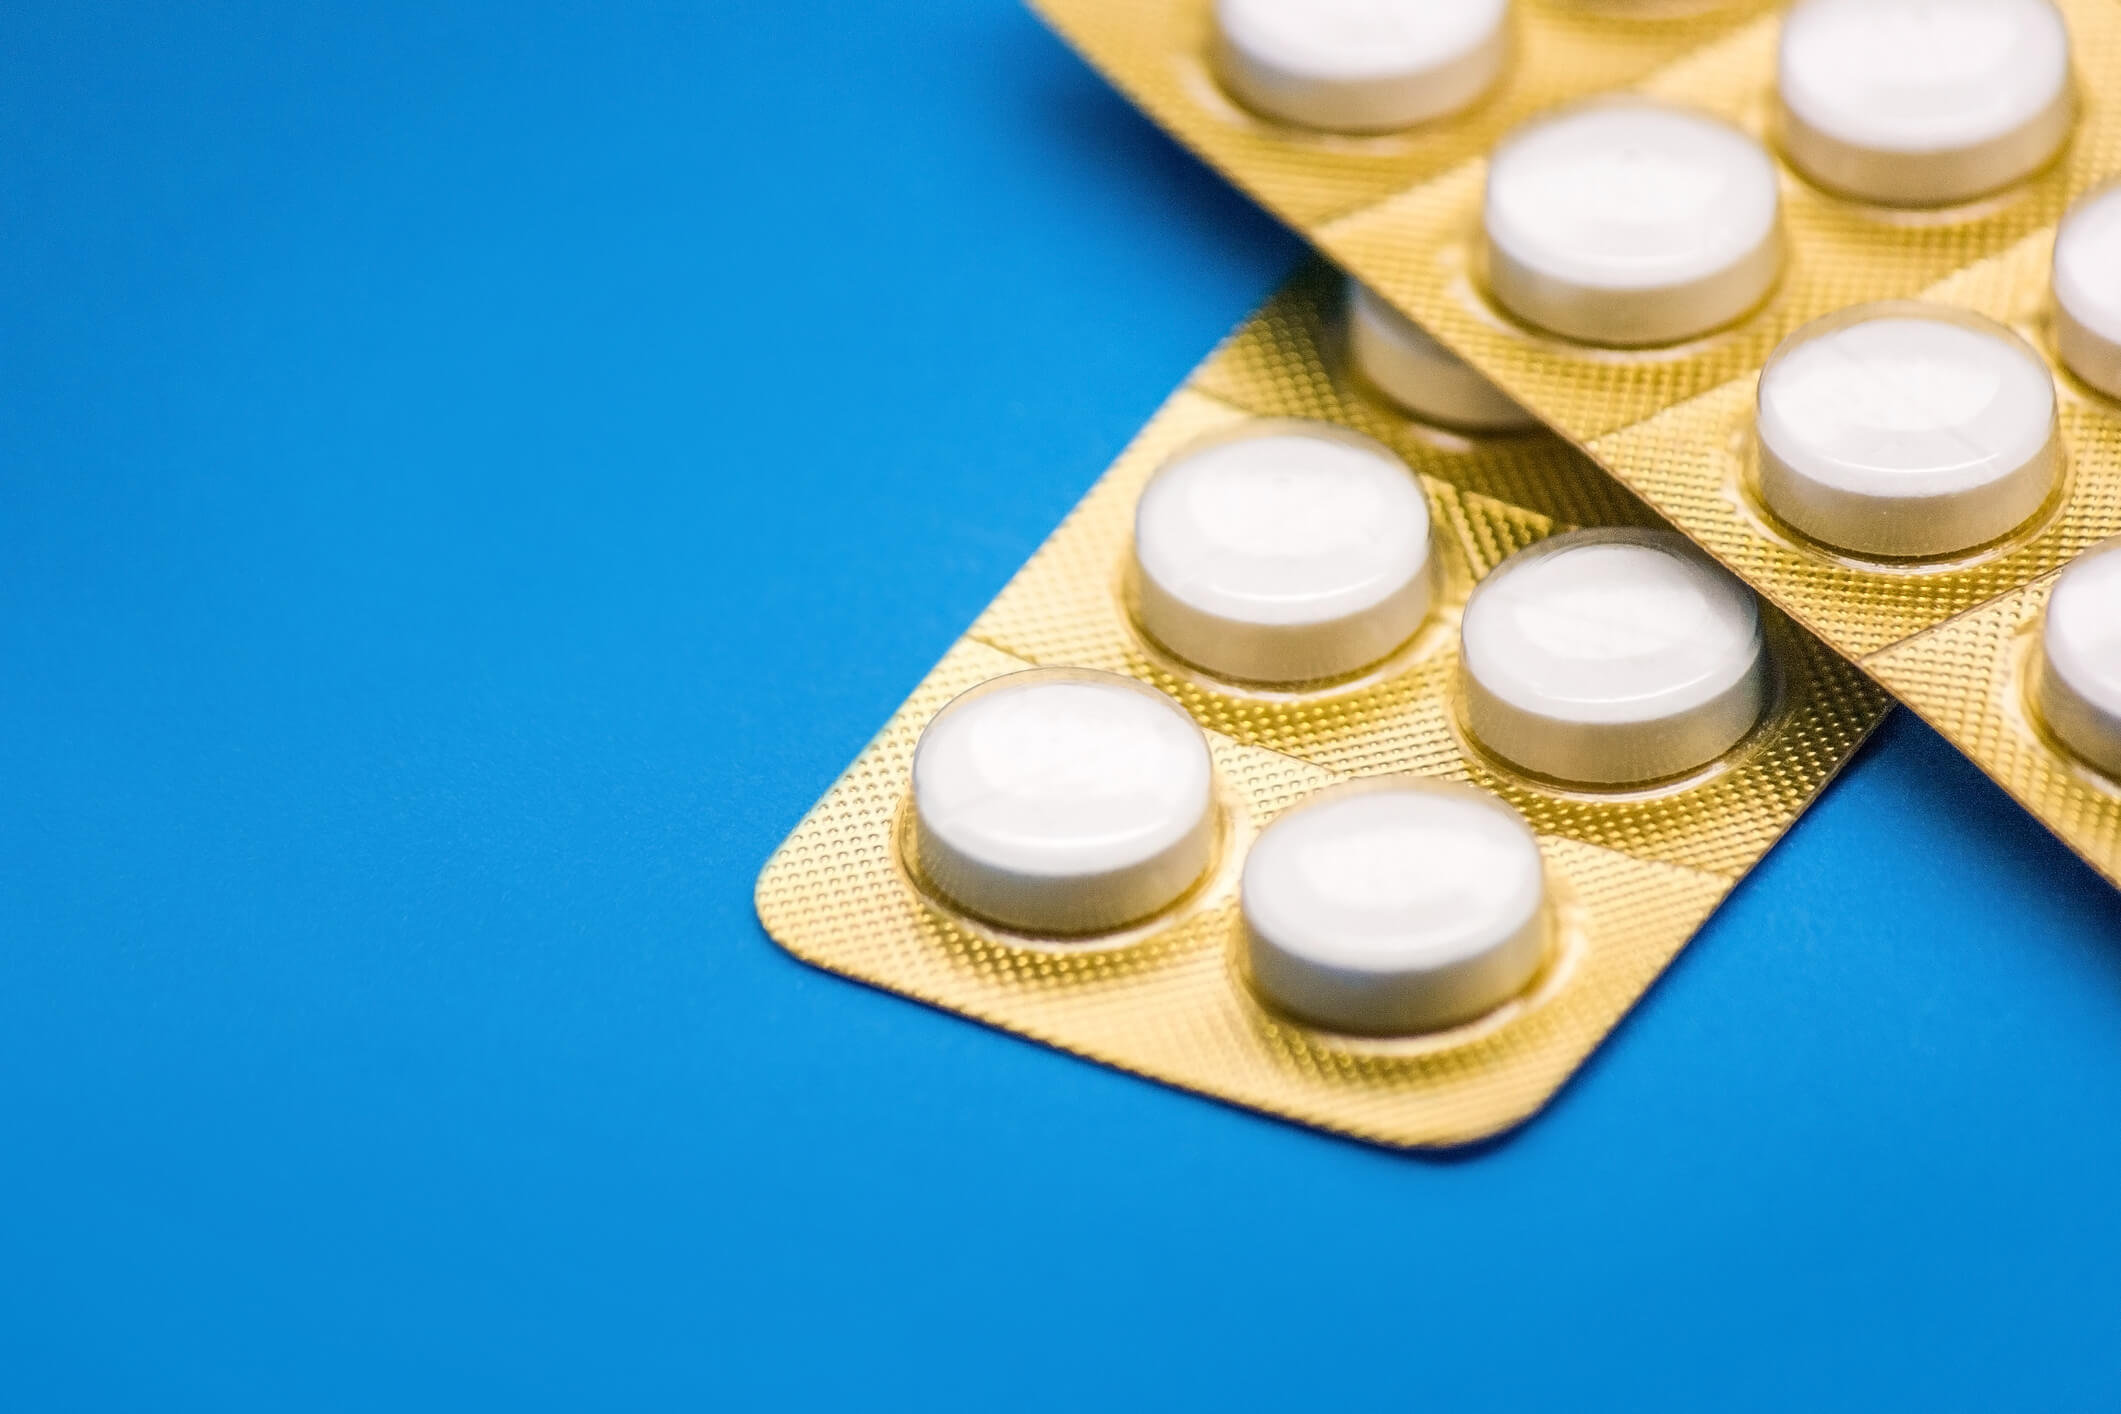 white pills with golden blister pack on a blue background close-up